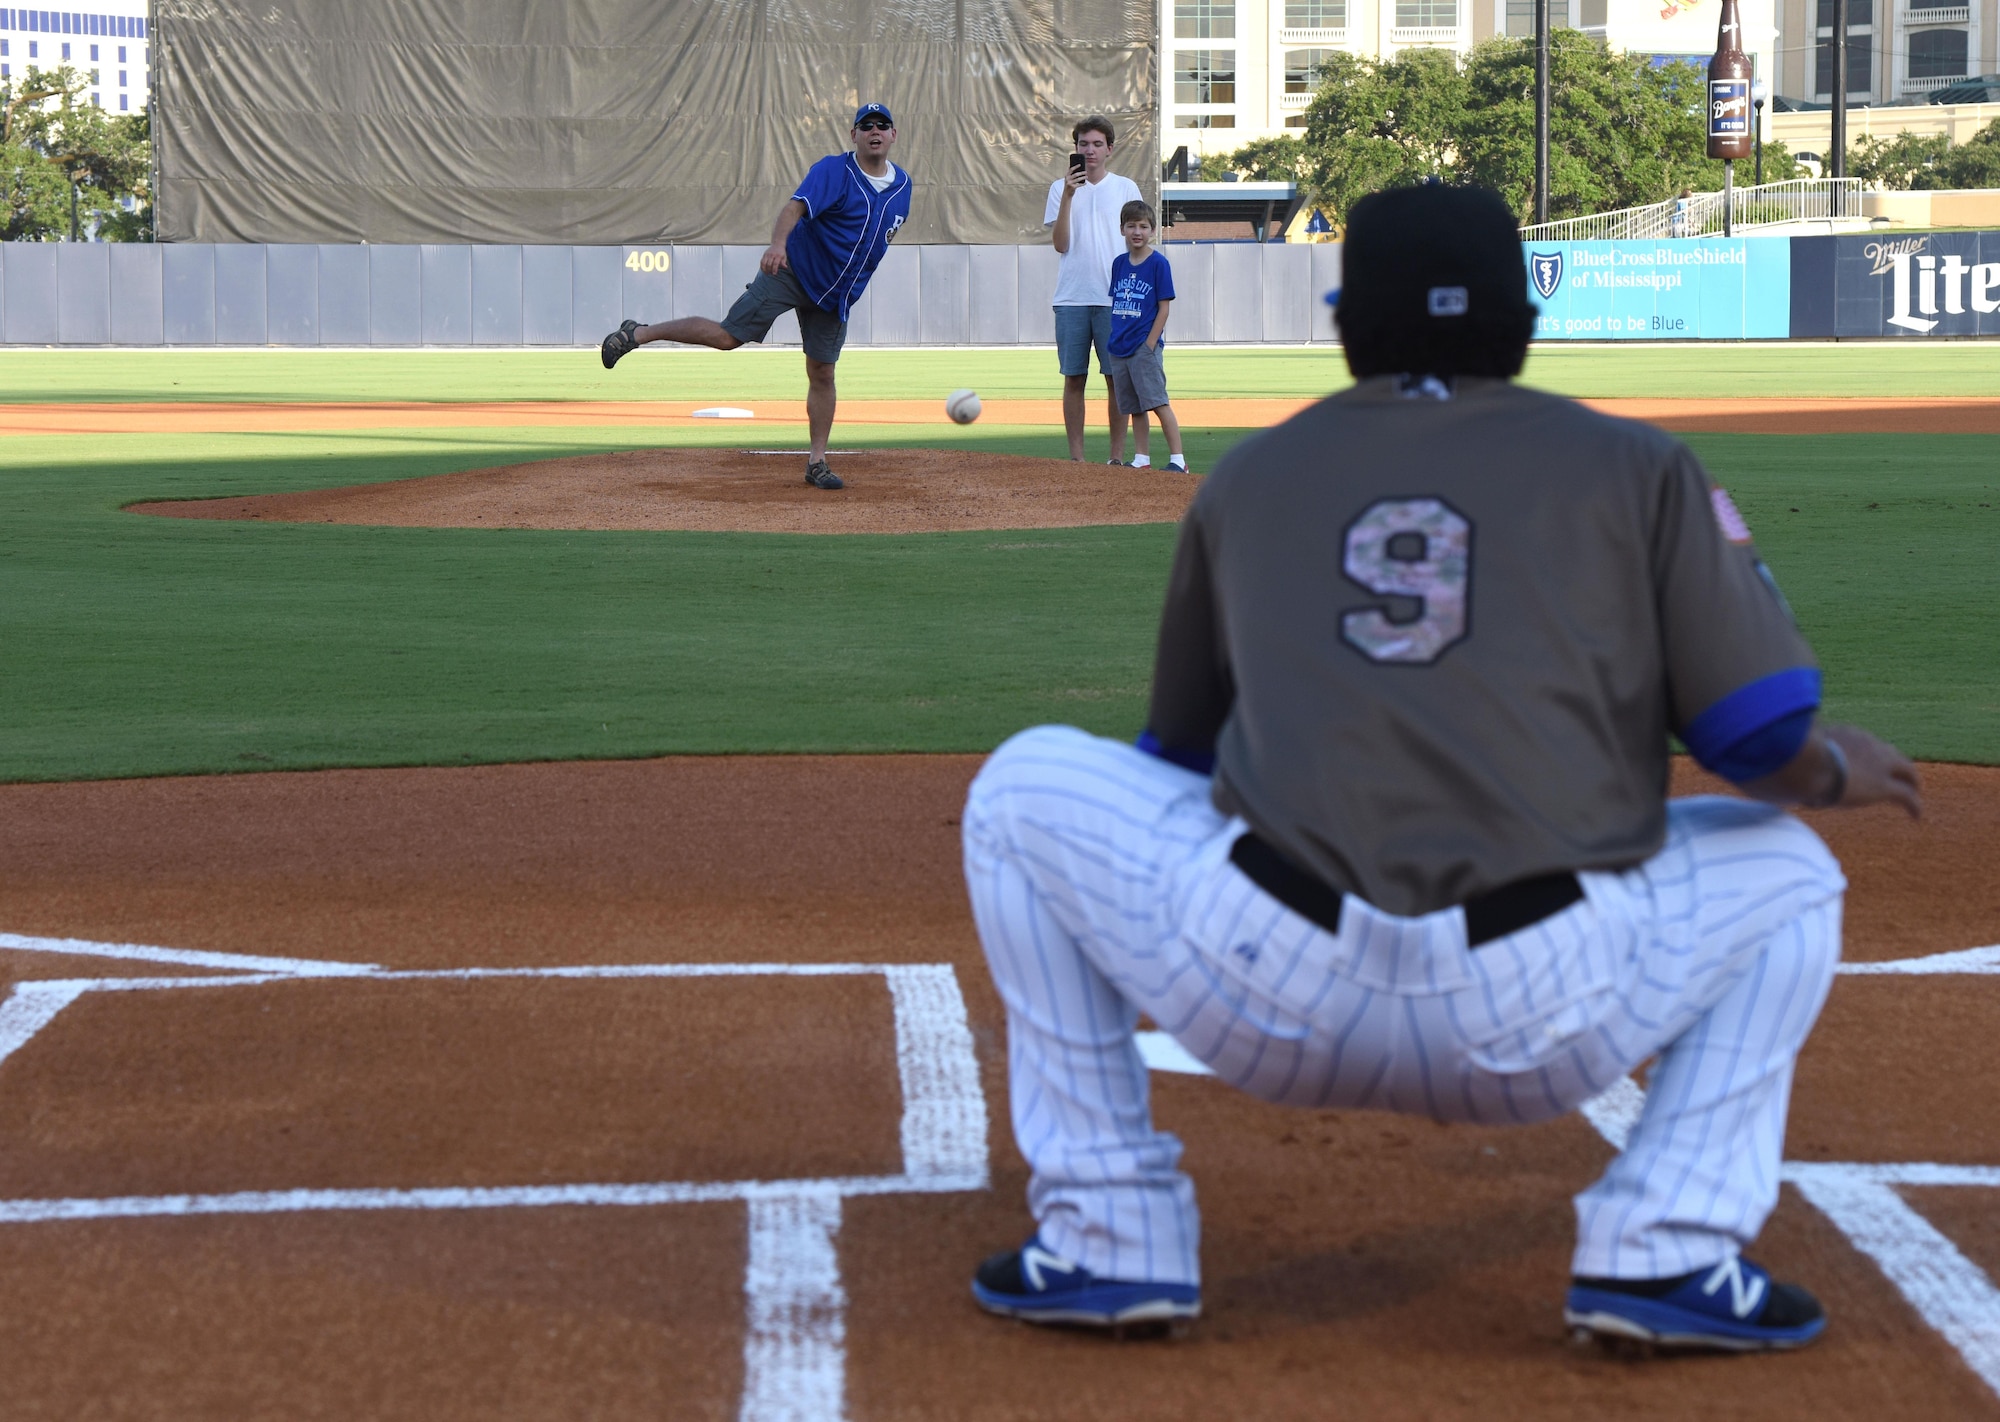 Lt. Col. Jerry Hambright, 81st Communications Squadron commander, throws the first pitch during the Biloxi Shuckers Minor League Baseball team’s military appreciation night July 31, 2017, in Biloxi, Miss. The Shuckers recognized and honored service members and their families for serving the nation. (U.S. Air Force photo by Kemberly Groue)